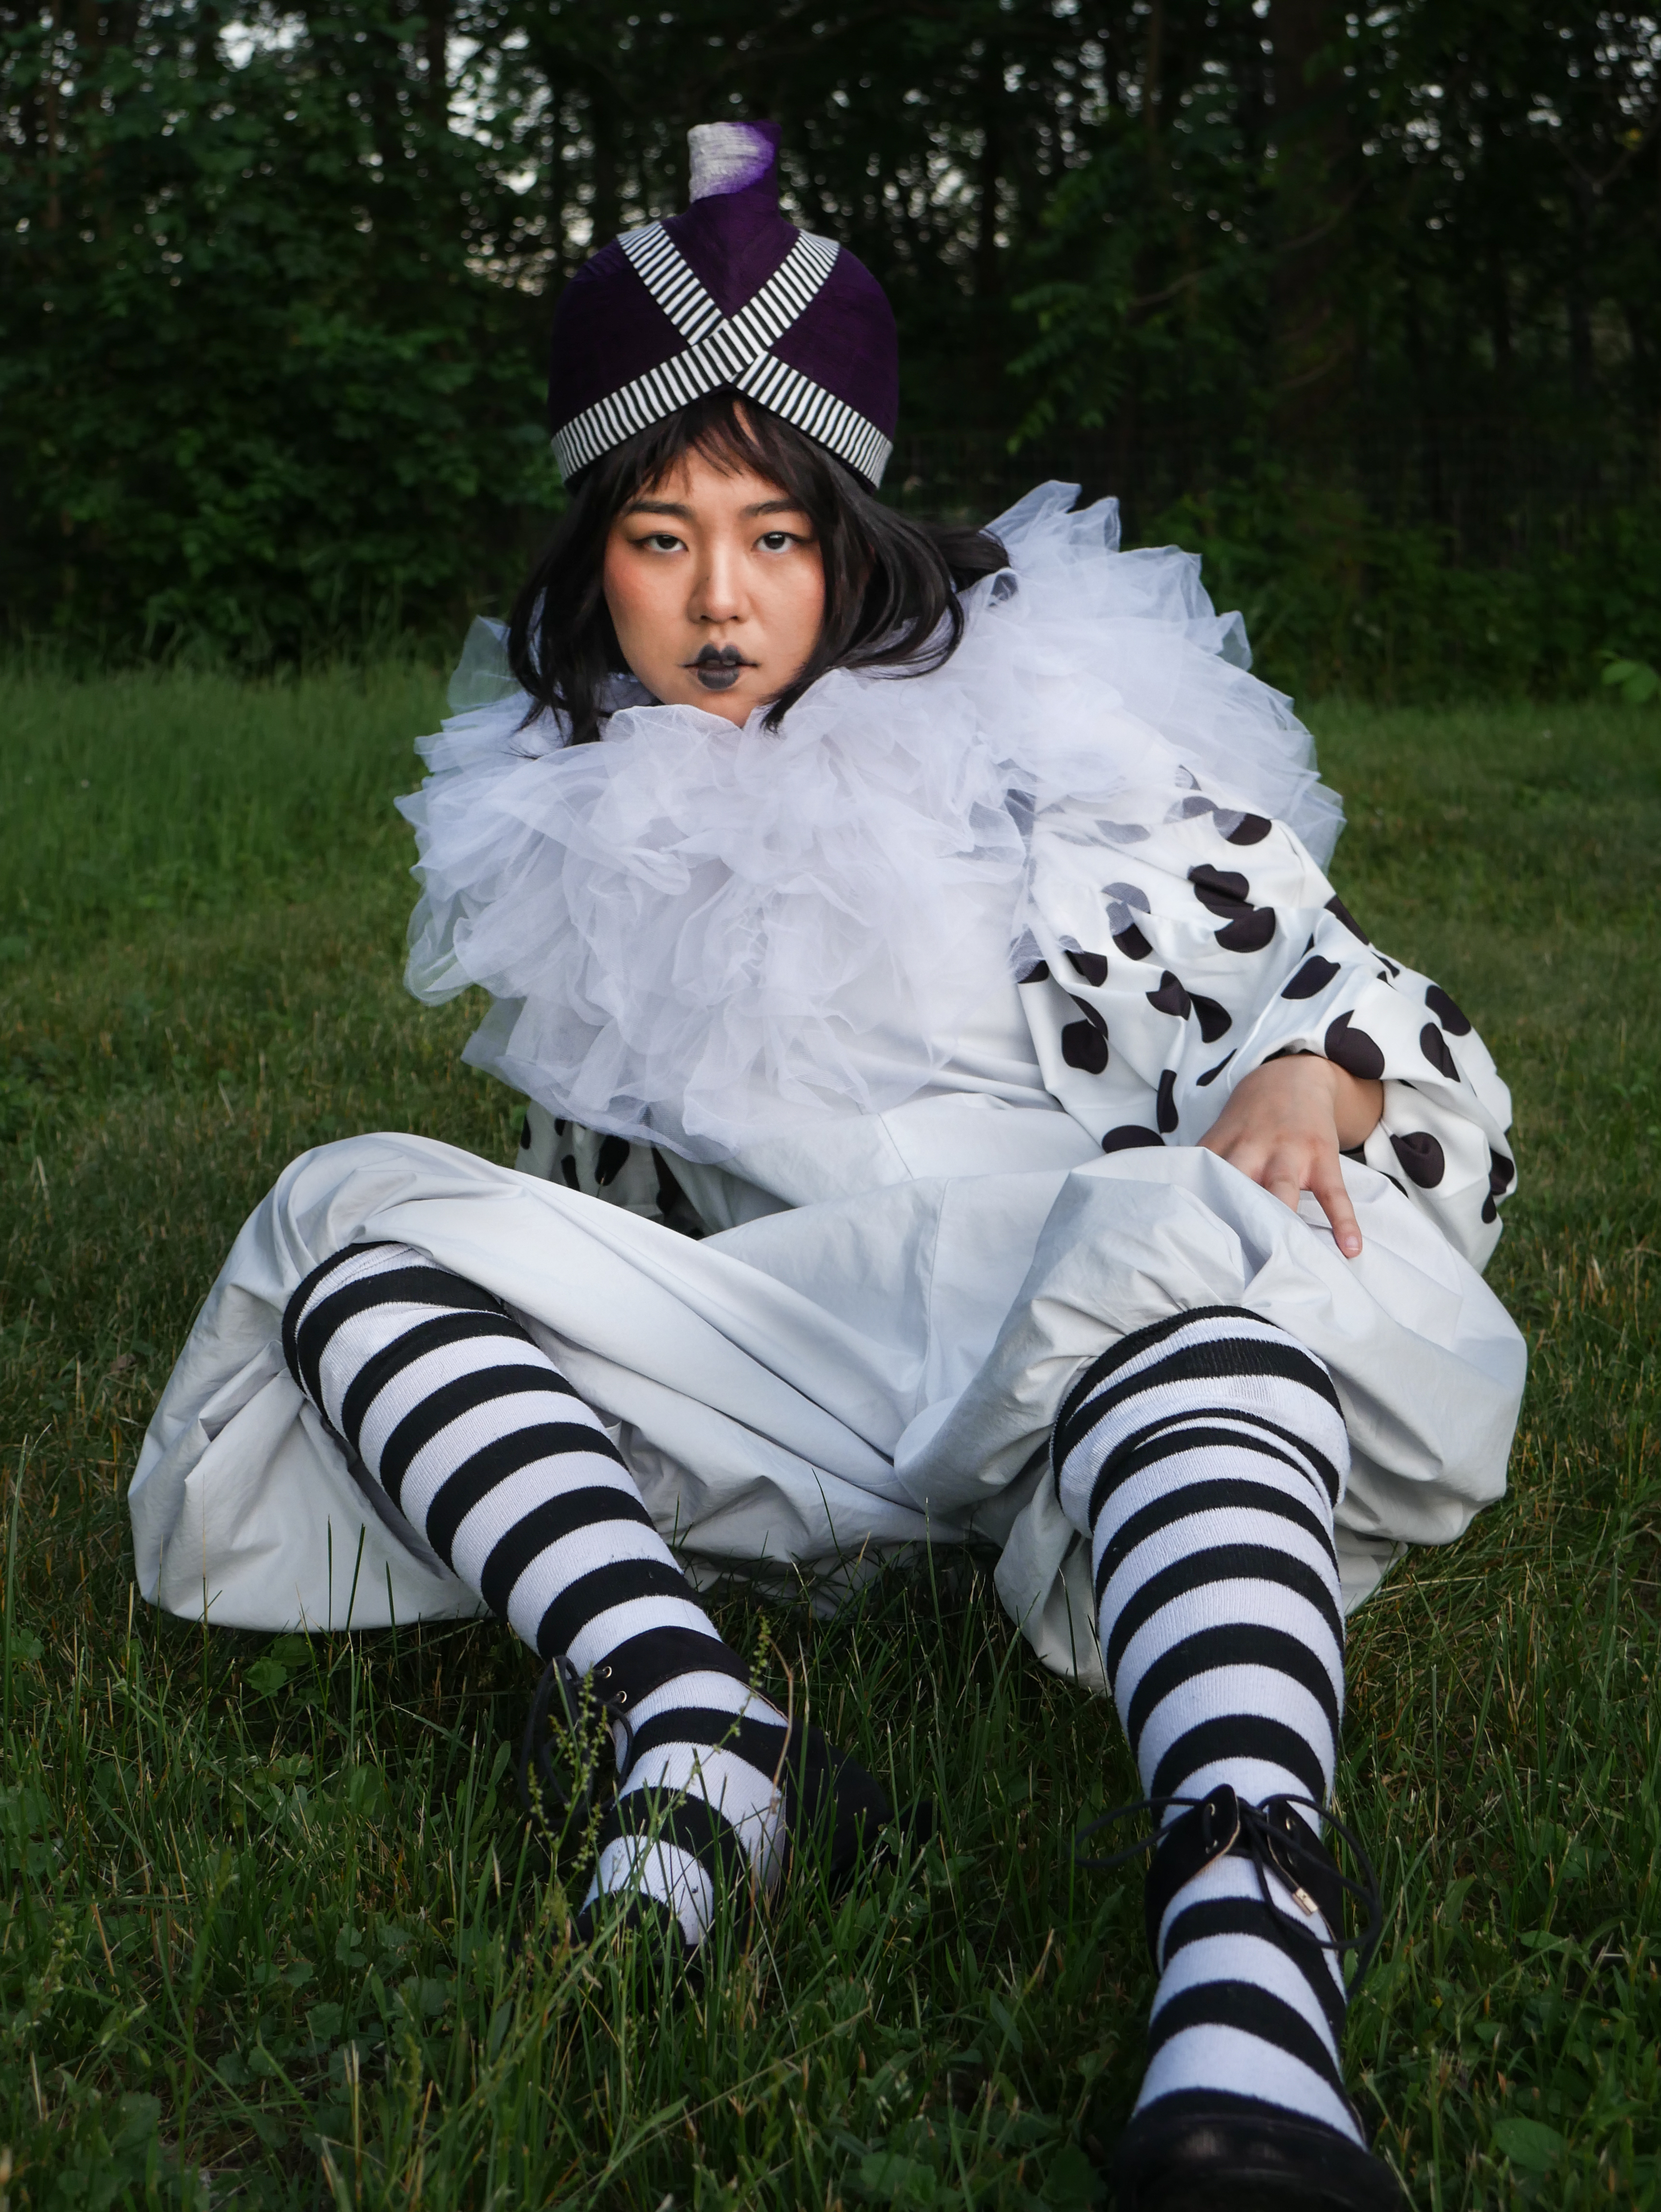 colorful photo of person of Asian descent sitting on grass in black and white striped and polka dot outfit with tulle collar and headpiece